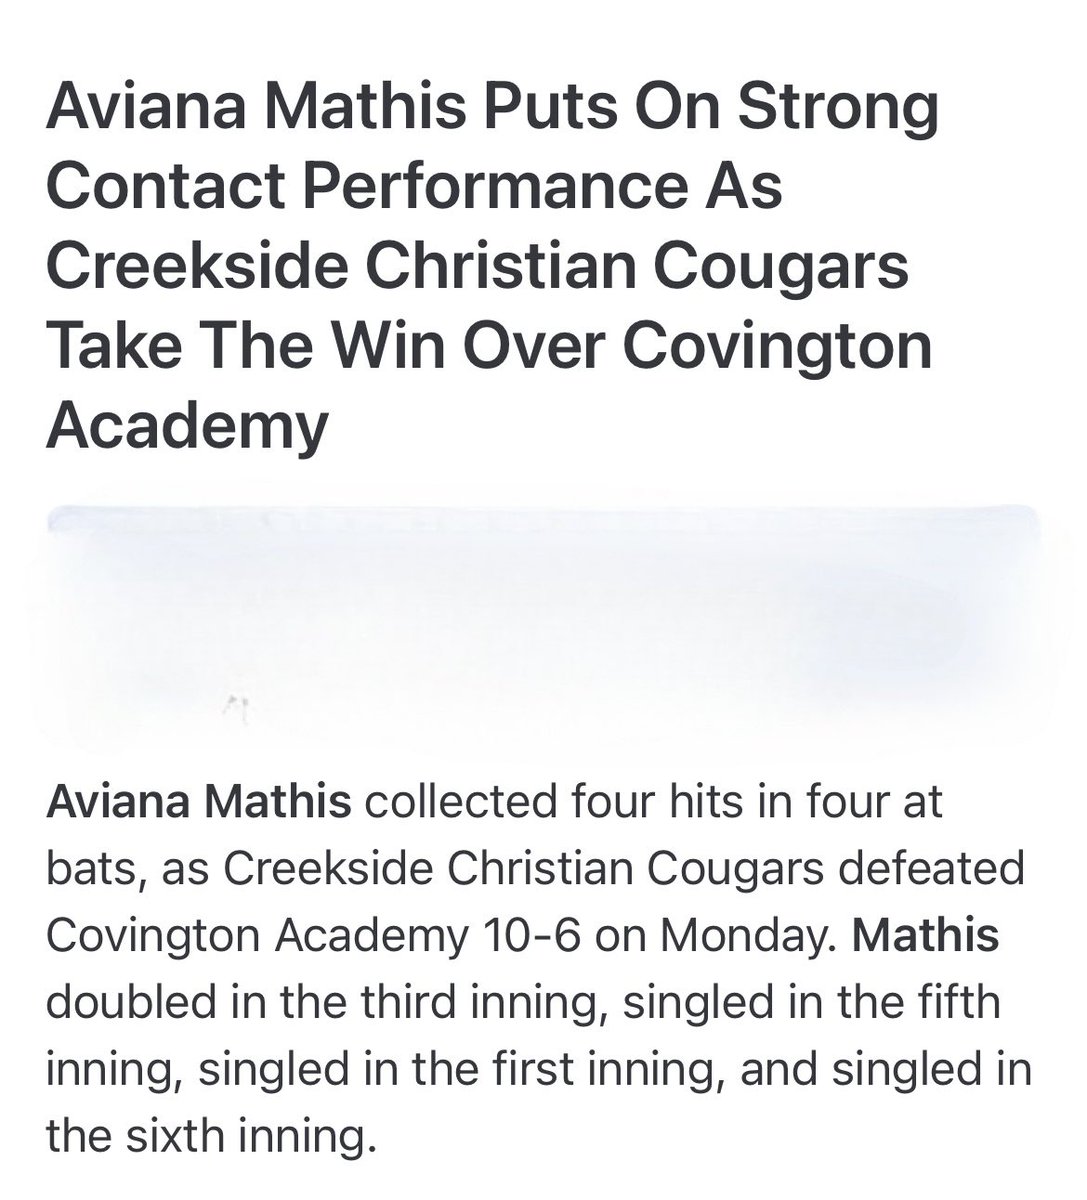 Took the win yesterday and ended with a .706 average. 

#Classof2027 
#fortheloveofthegame 
#CreeksideCougars
#Varsity2024